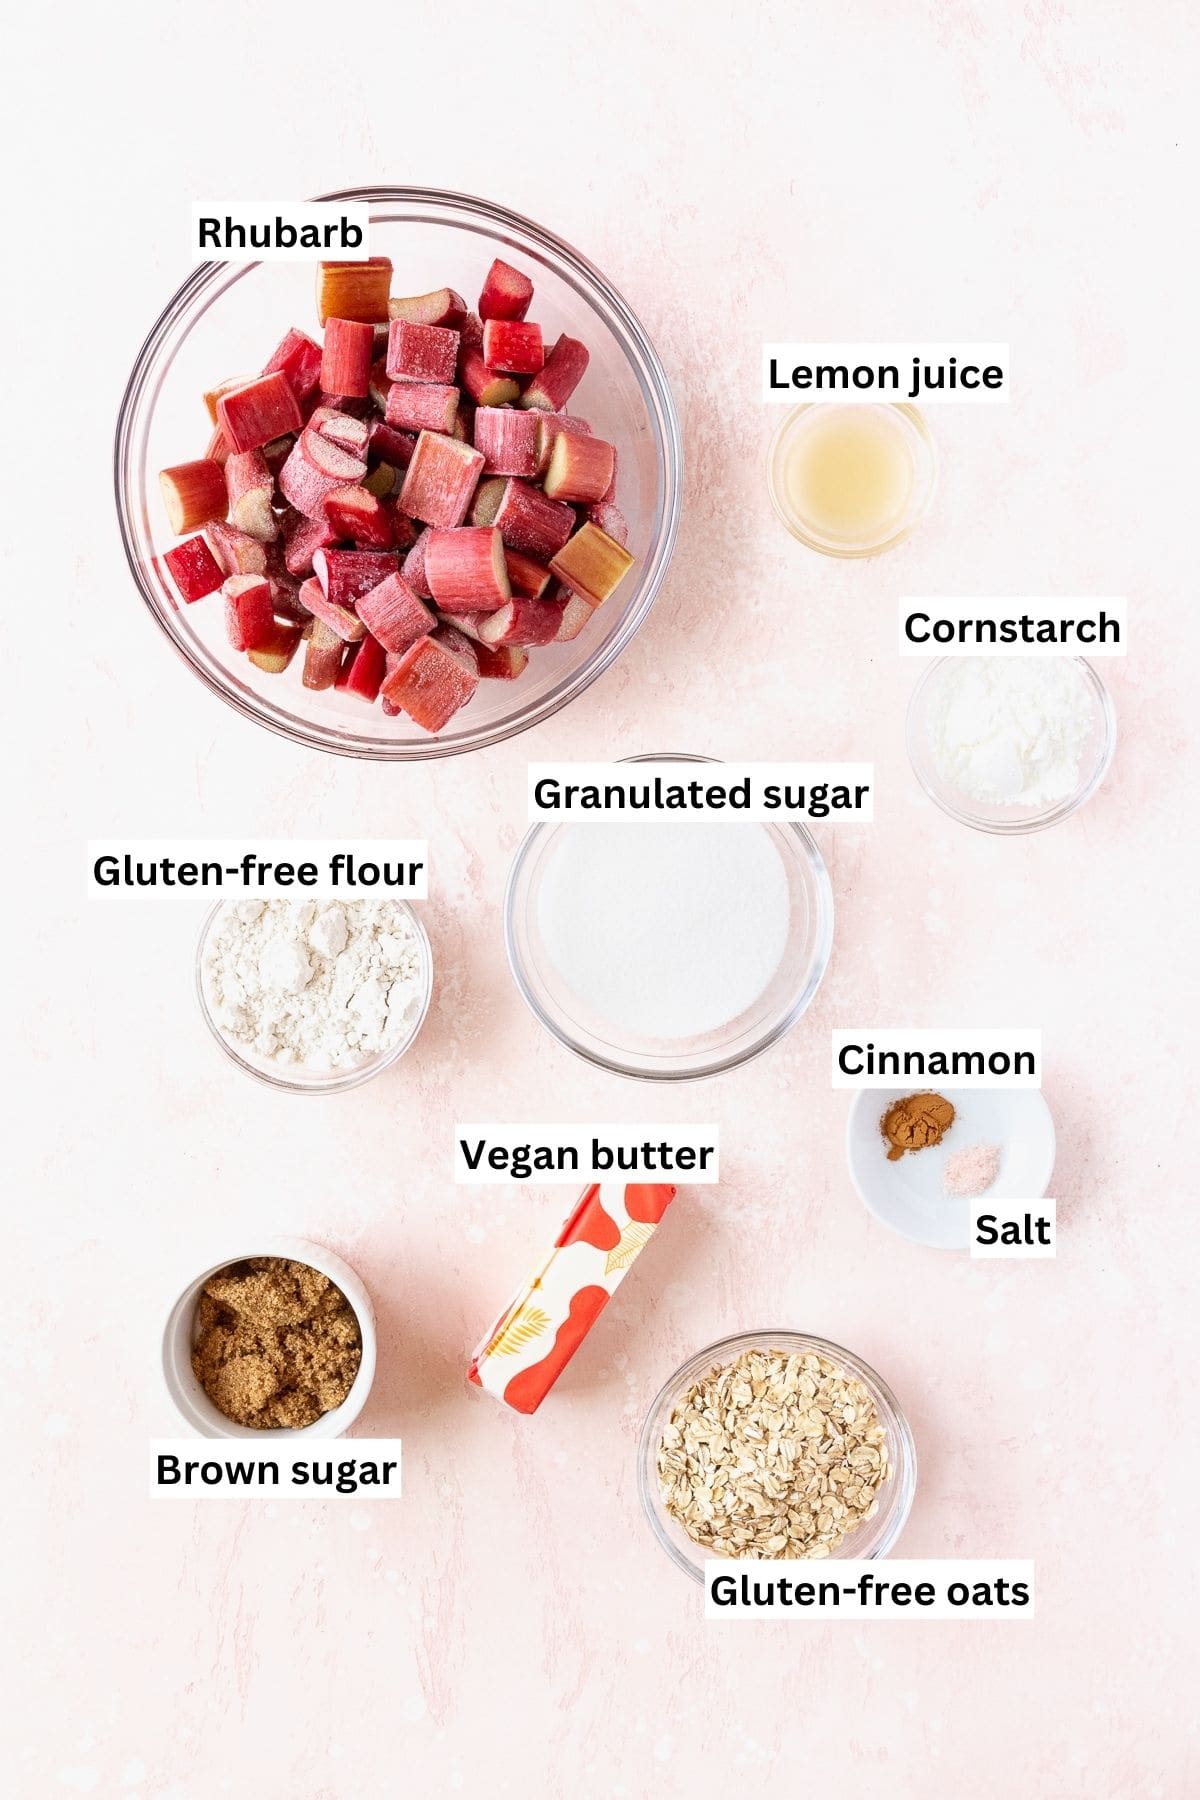 Ingredients needed to make gluten-free rhubarb crisp measured out into bowls on a pink table with text overlay.